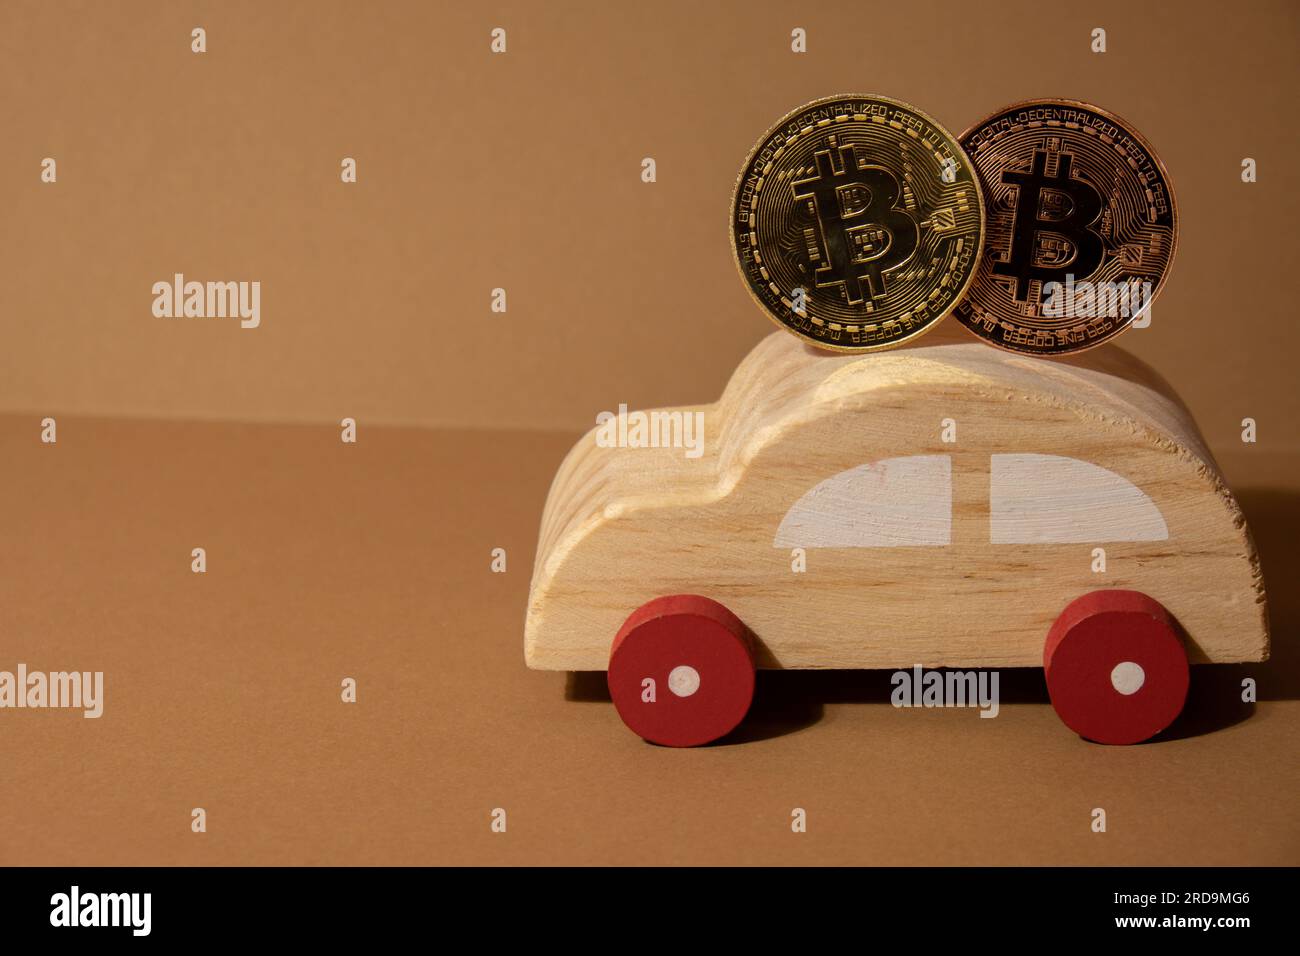 Bitcoin gold coin with wooden toy car. Saving and manage money for transport car loan mining trading concept. Automotive transportation industry merge with technology exchange financial market can pay money to seller online in blockchain. BTC Cryptocurrency or crypto digital payment system. Digital coin money farm in digital cyberspace Stock Photo